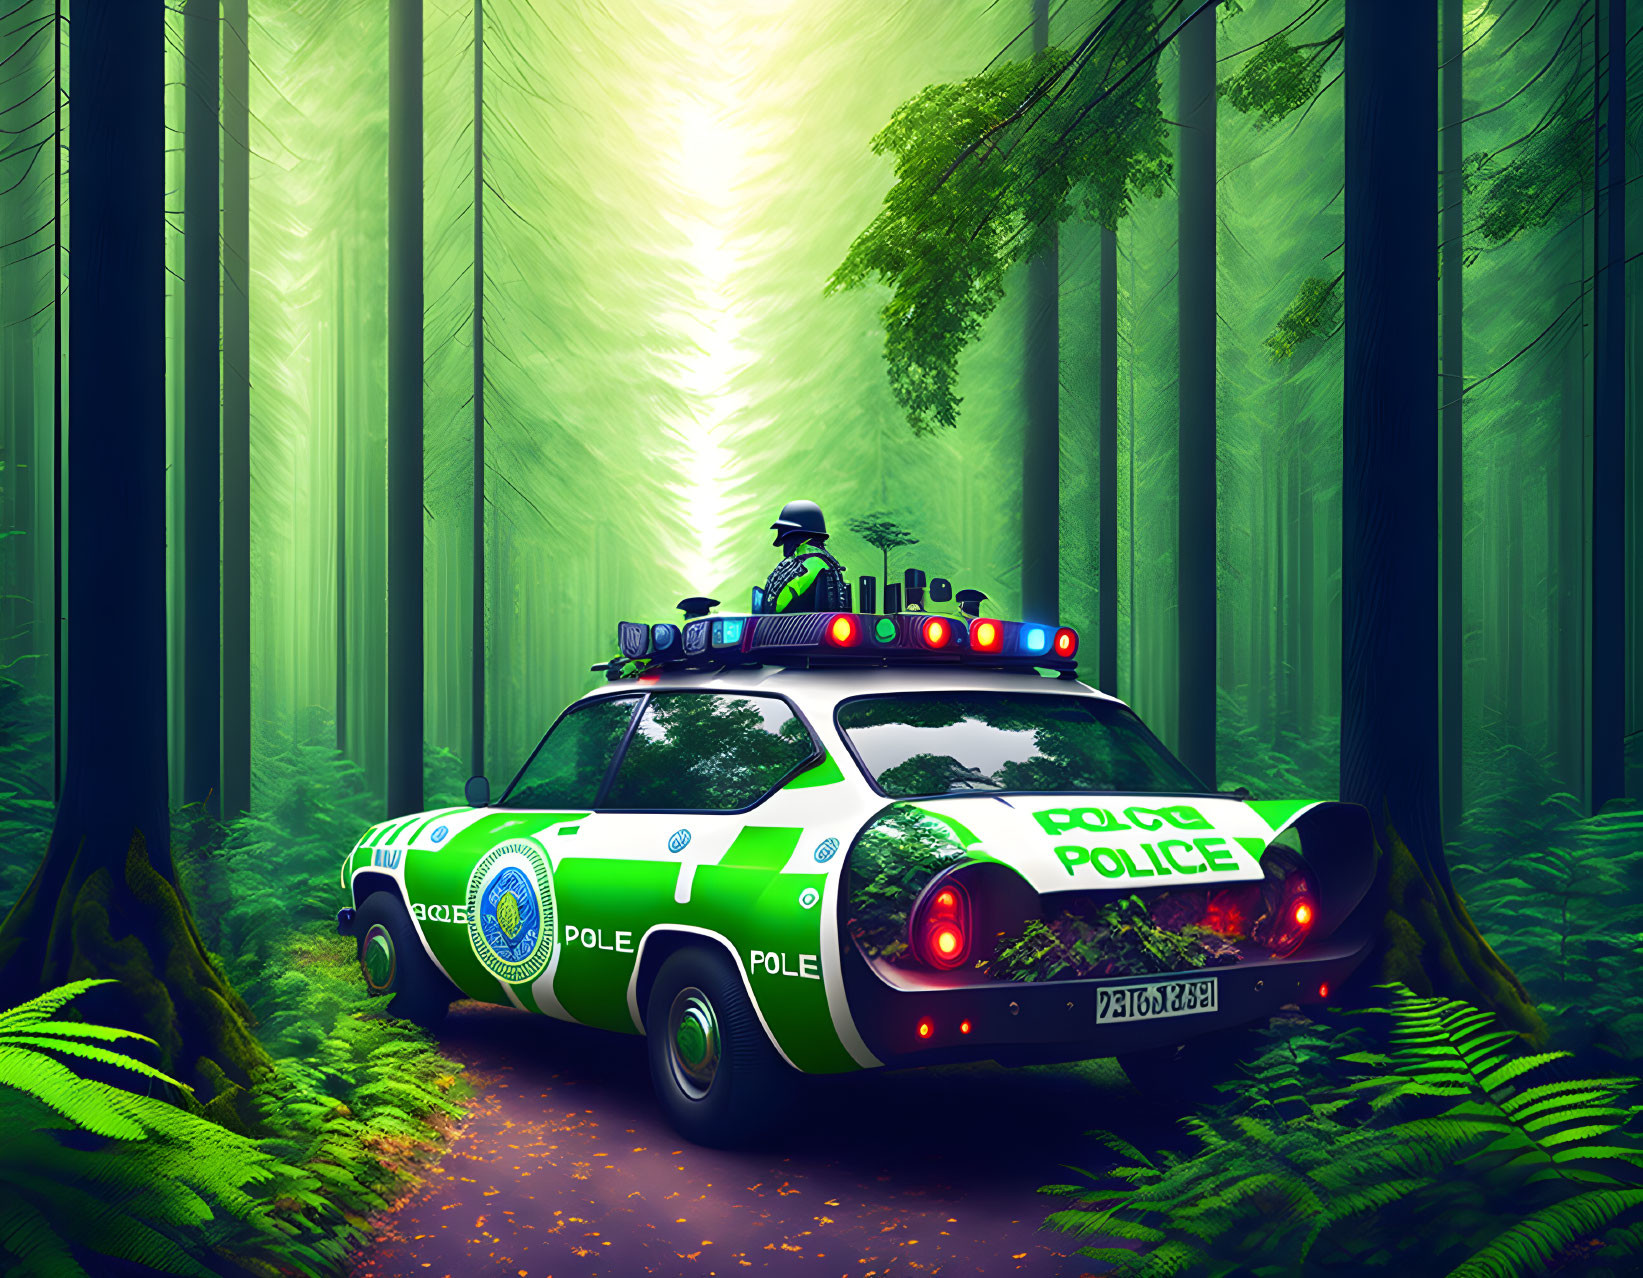 Stylized police car with "POLO POLICE" in green forest